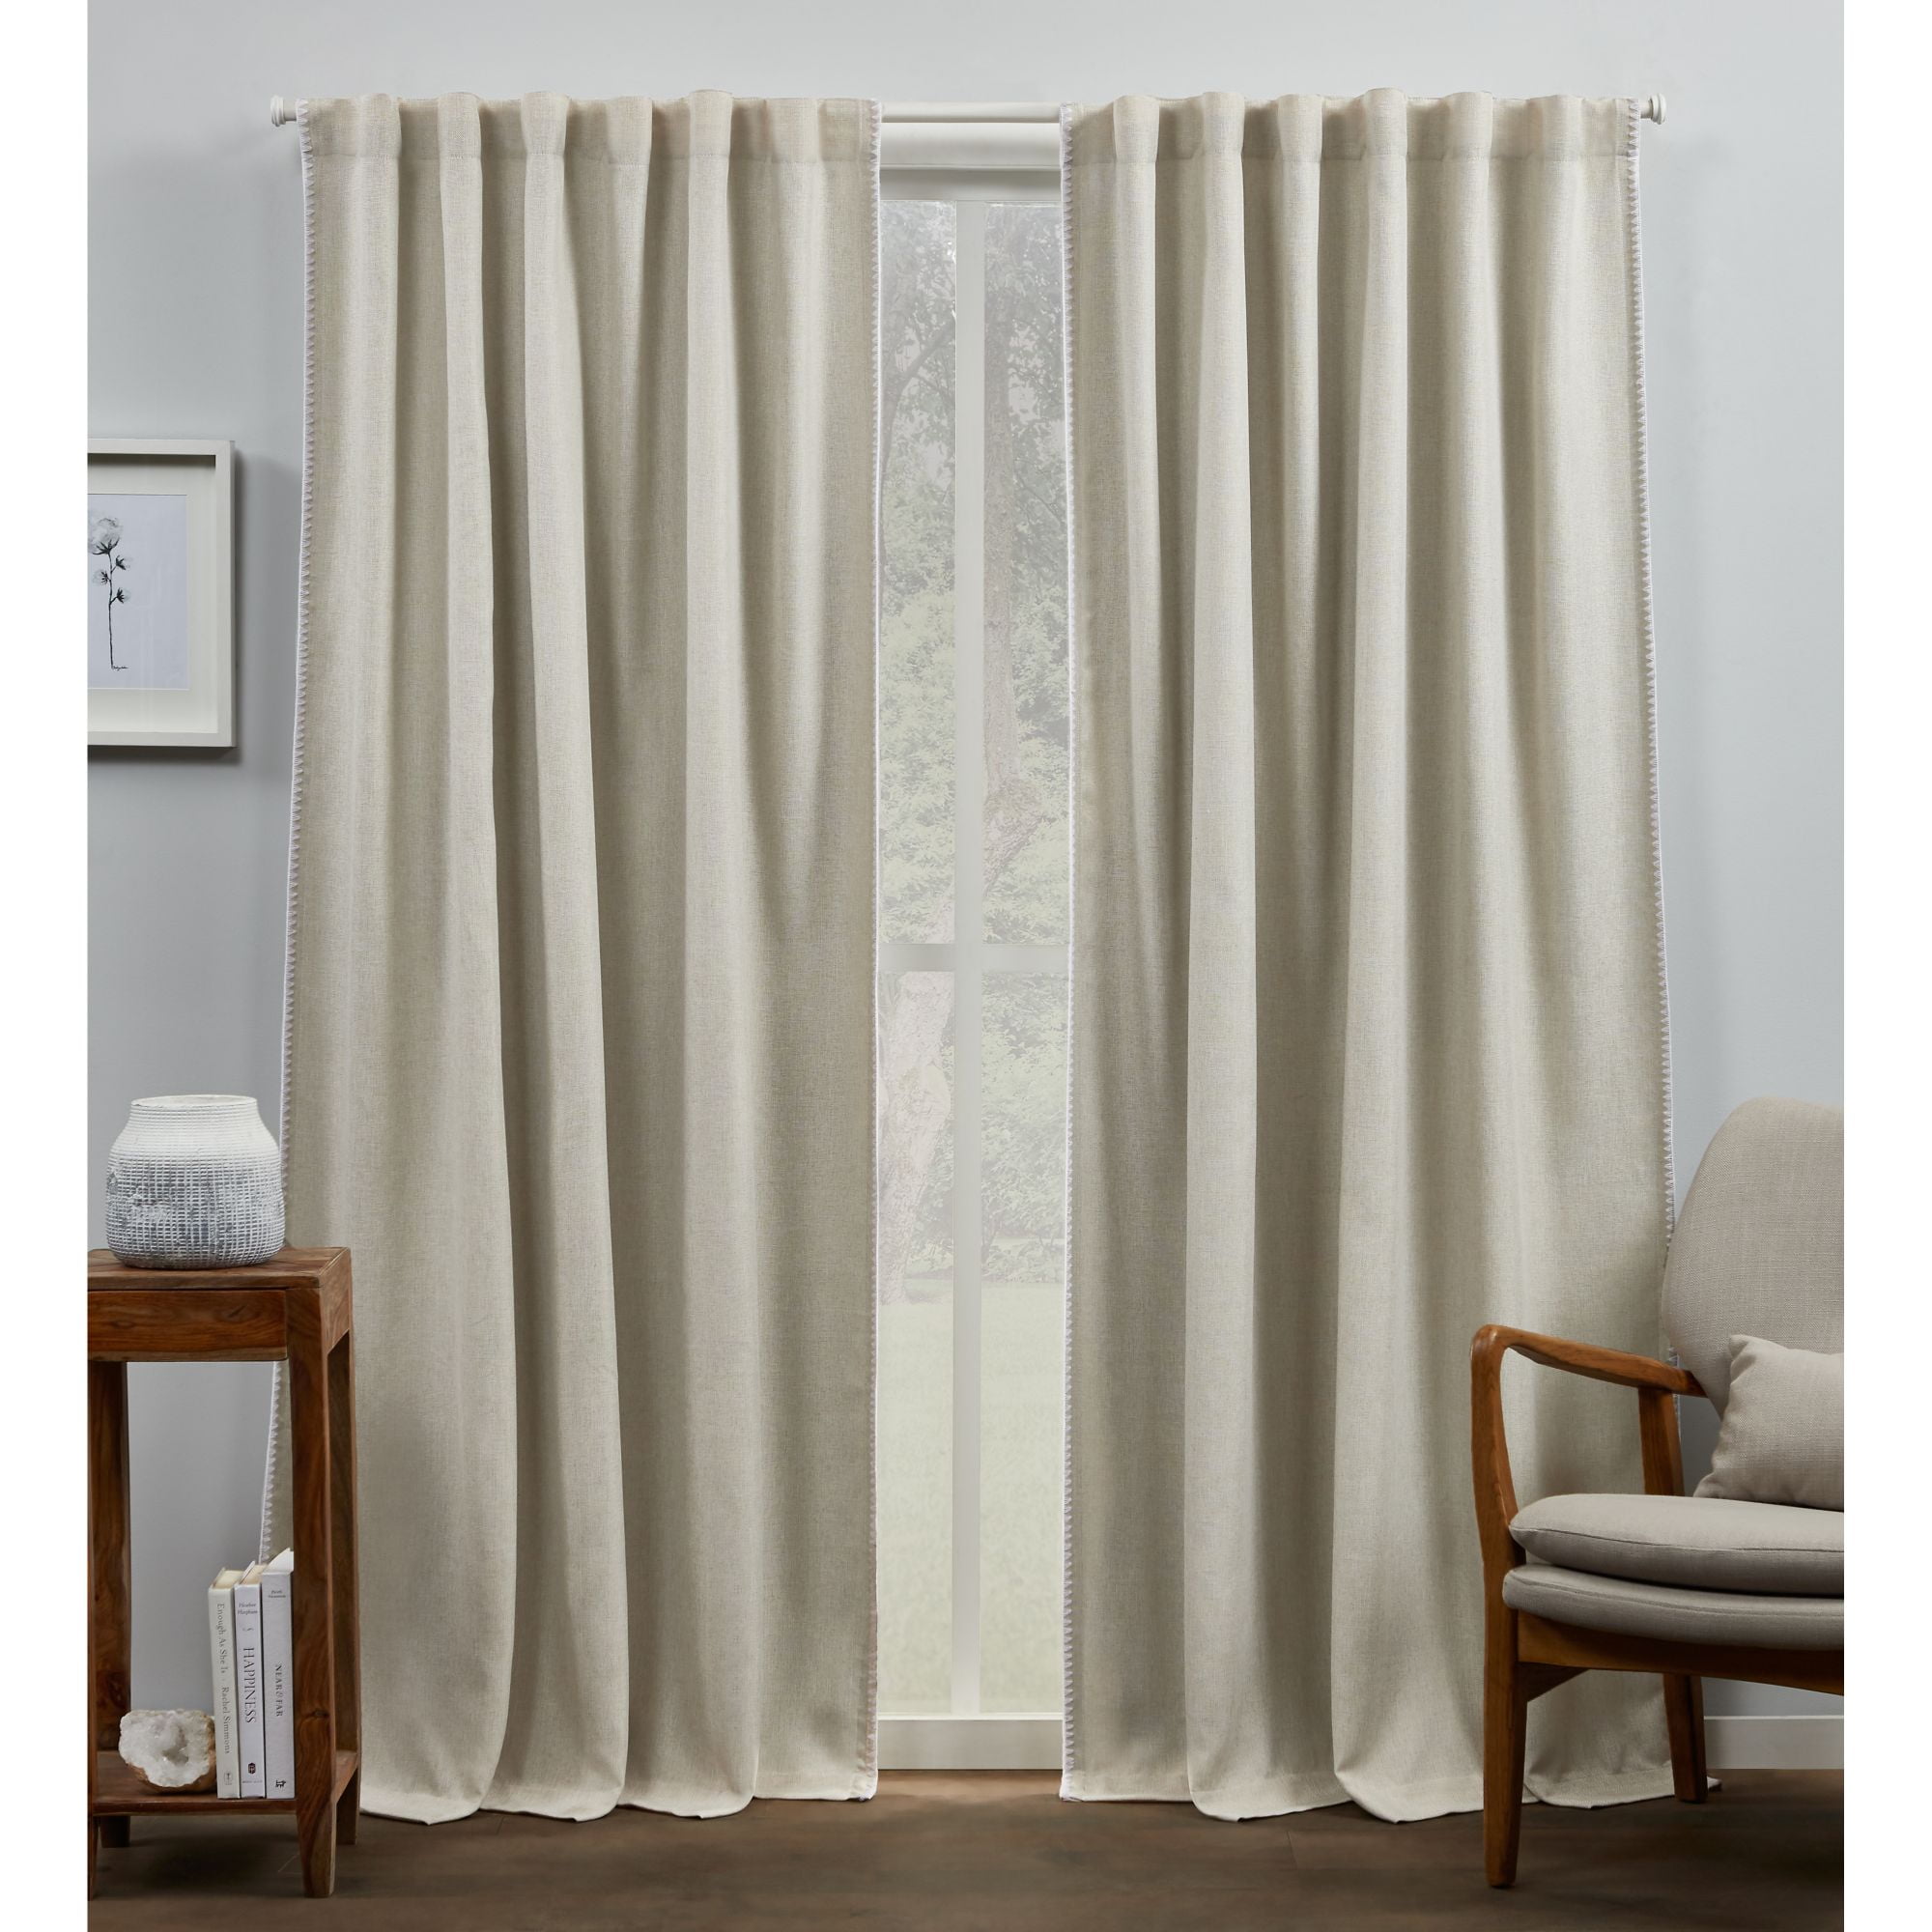 Exclusive Home Curtains Marabel Lined Blackout Hidden Tab Top Curtain Panel  Pair, 54 x 96, Linen/White, Set of 2 